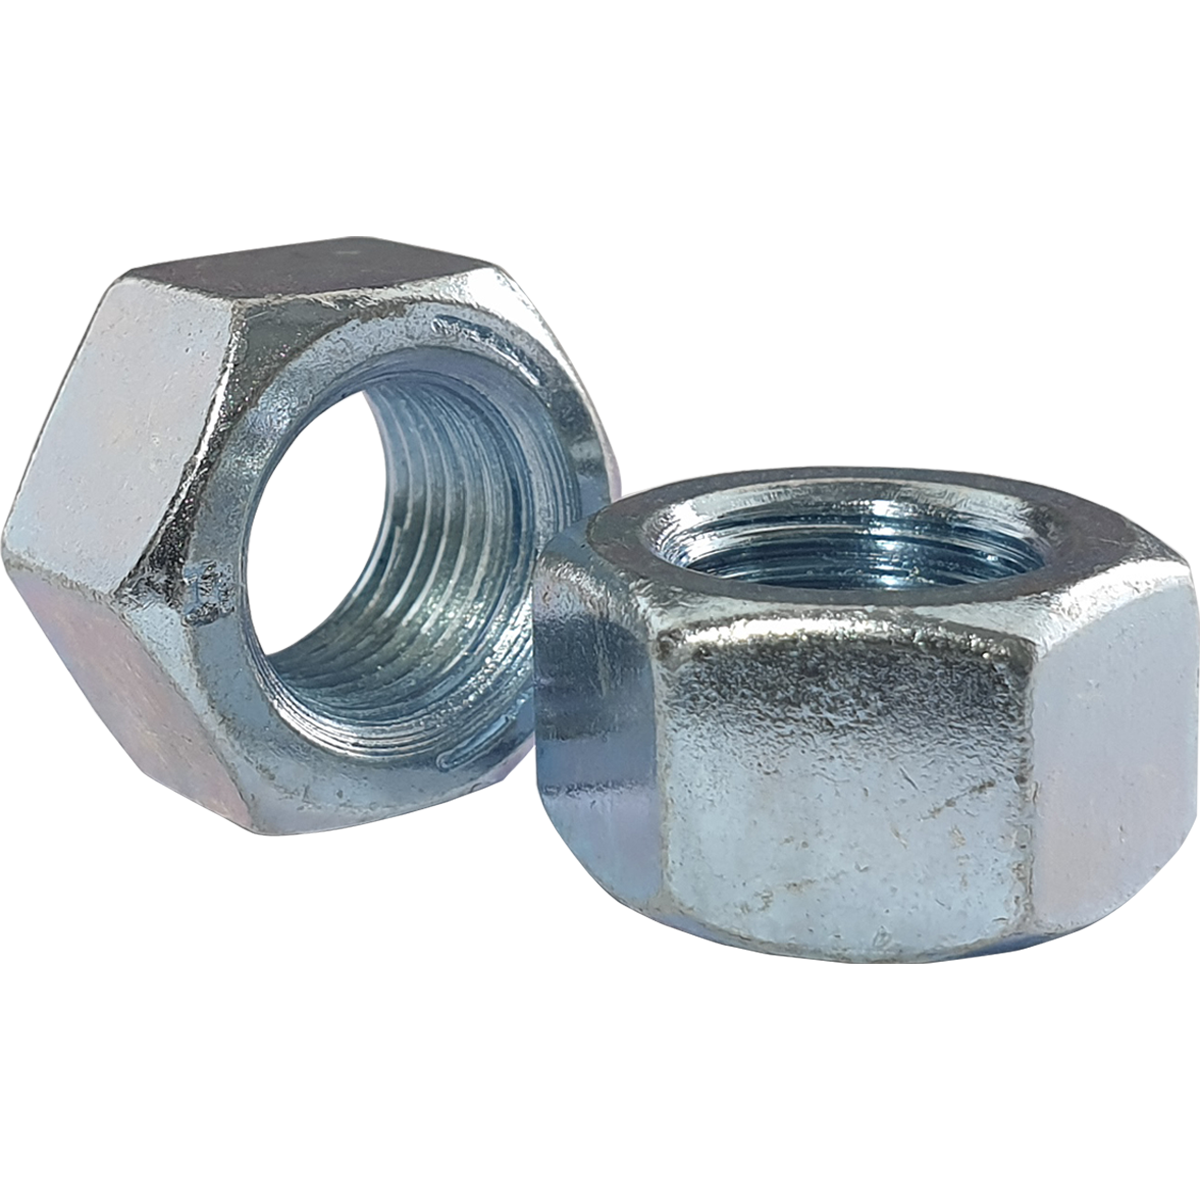 UNF - BZP full hex nuts, also known as hexagon nuts. Various diameters available with competitive prices and bulk discounts from Fusion Fixings